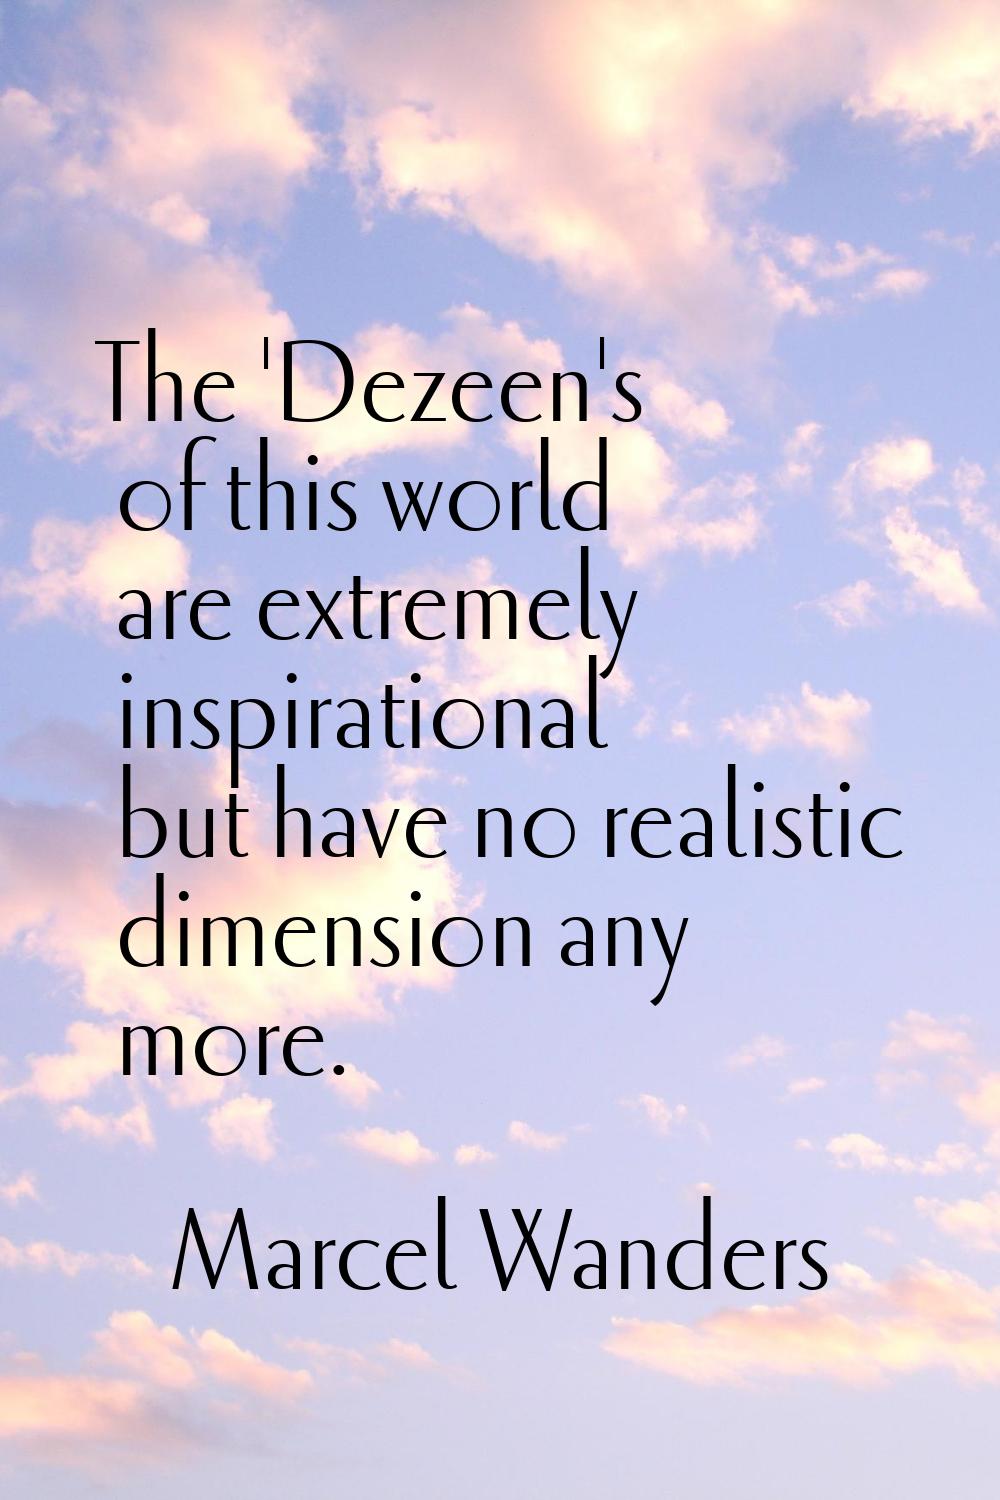 The 'Dezeen's of this world are extremely inspirational but have no realistic dimension any more.